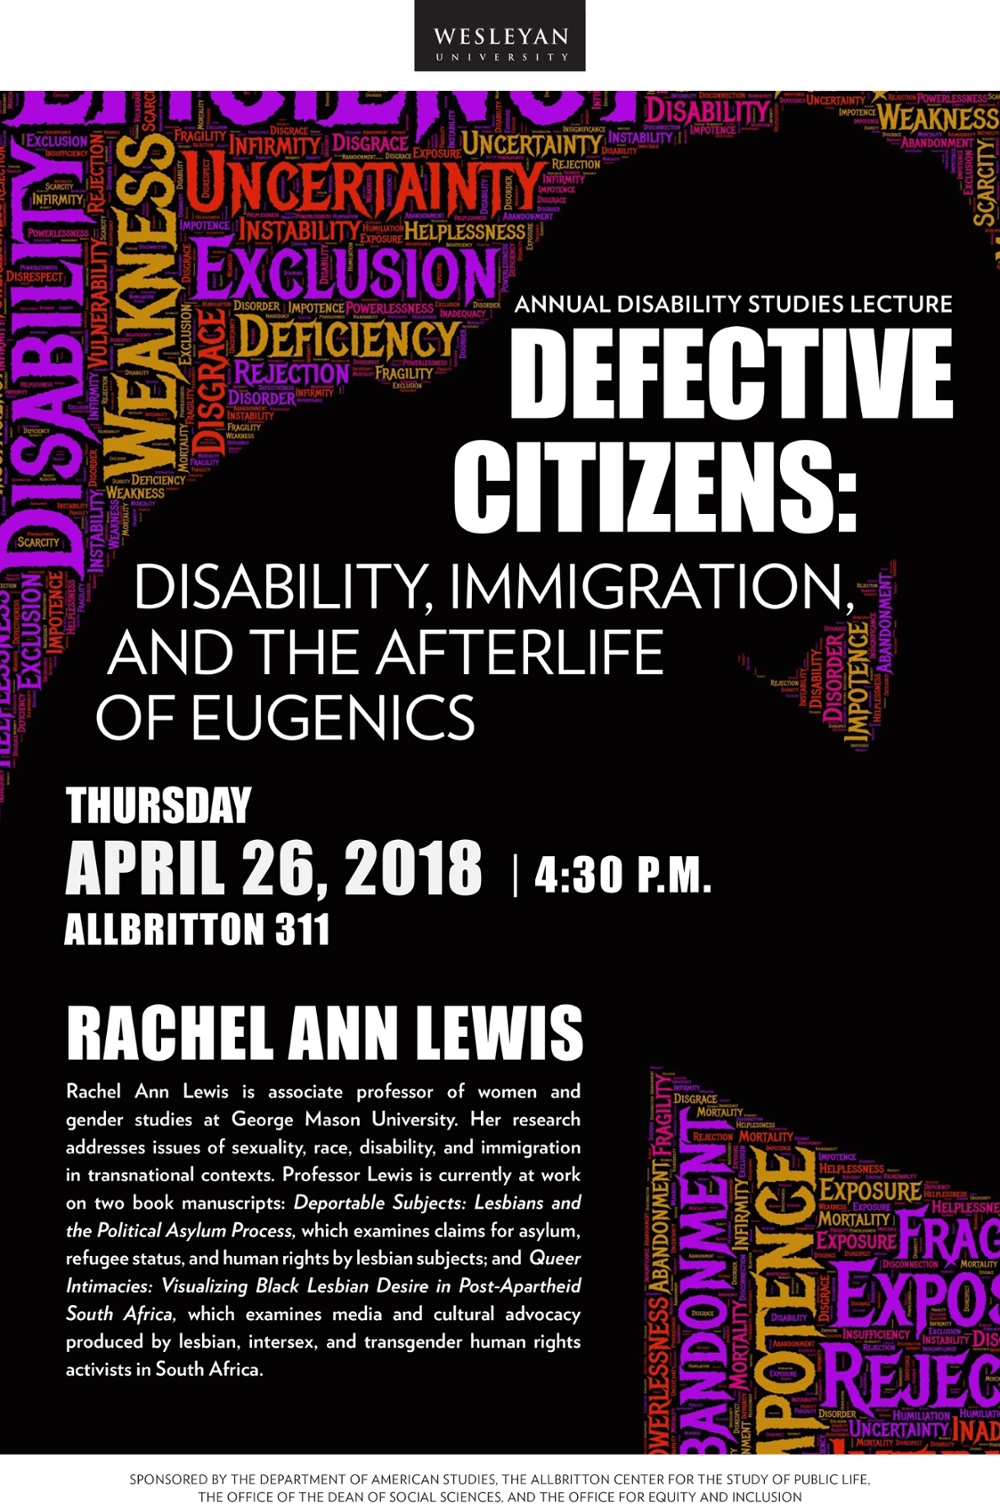 Defective Citizens: Disability, Immigration, and the Afterlife of Eugenics lecture